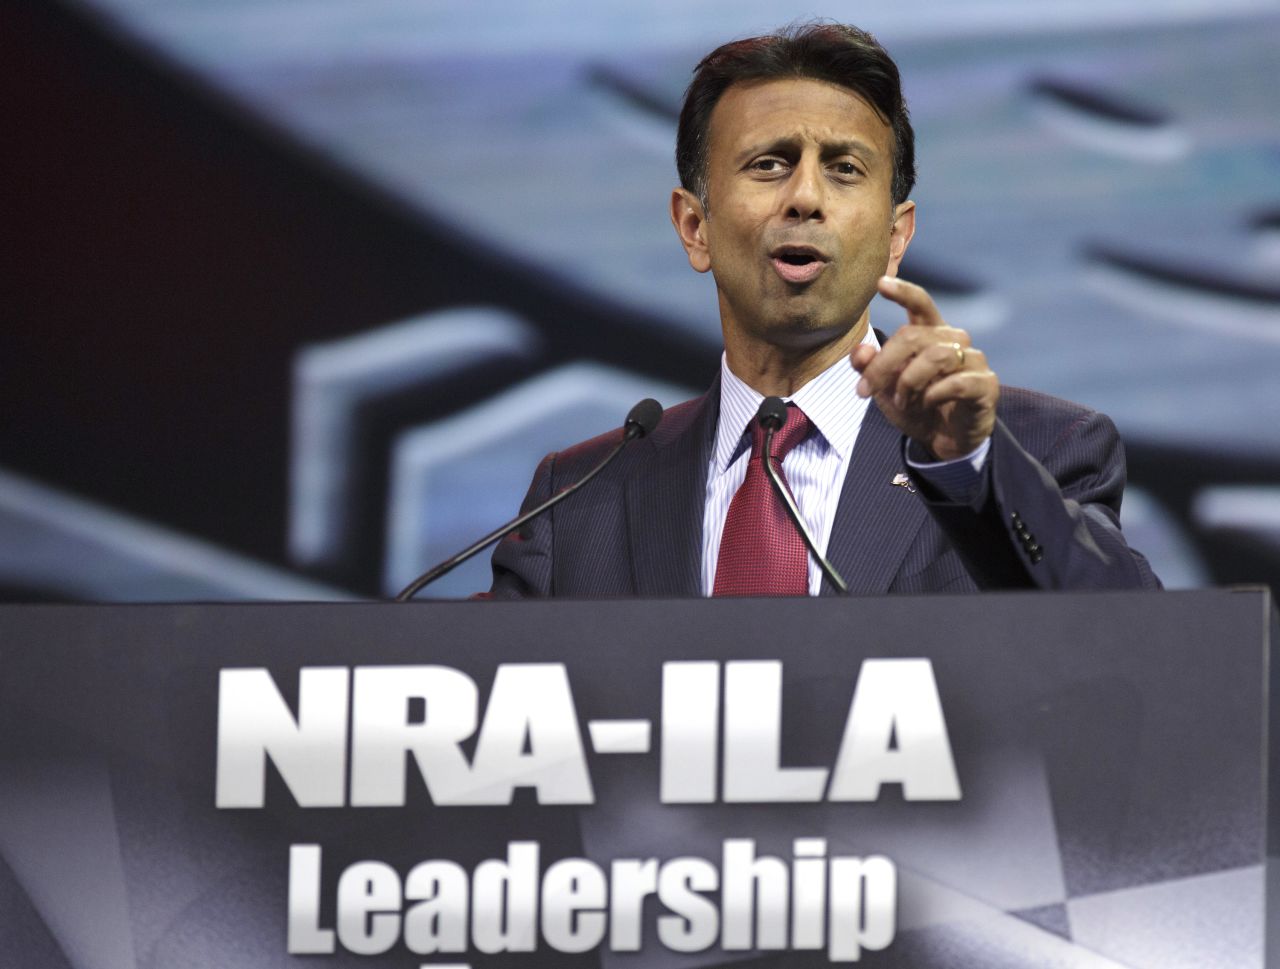 Jindal, a gun rights advocate, speaks during the National Rifle Association Annual Meeting Leadership Forum on April 25, 2014 in Indianapolis.